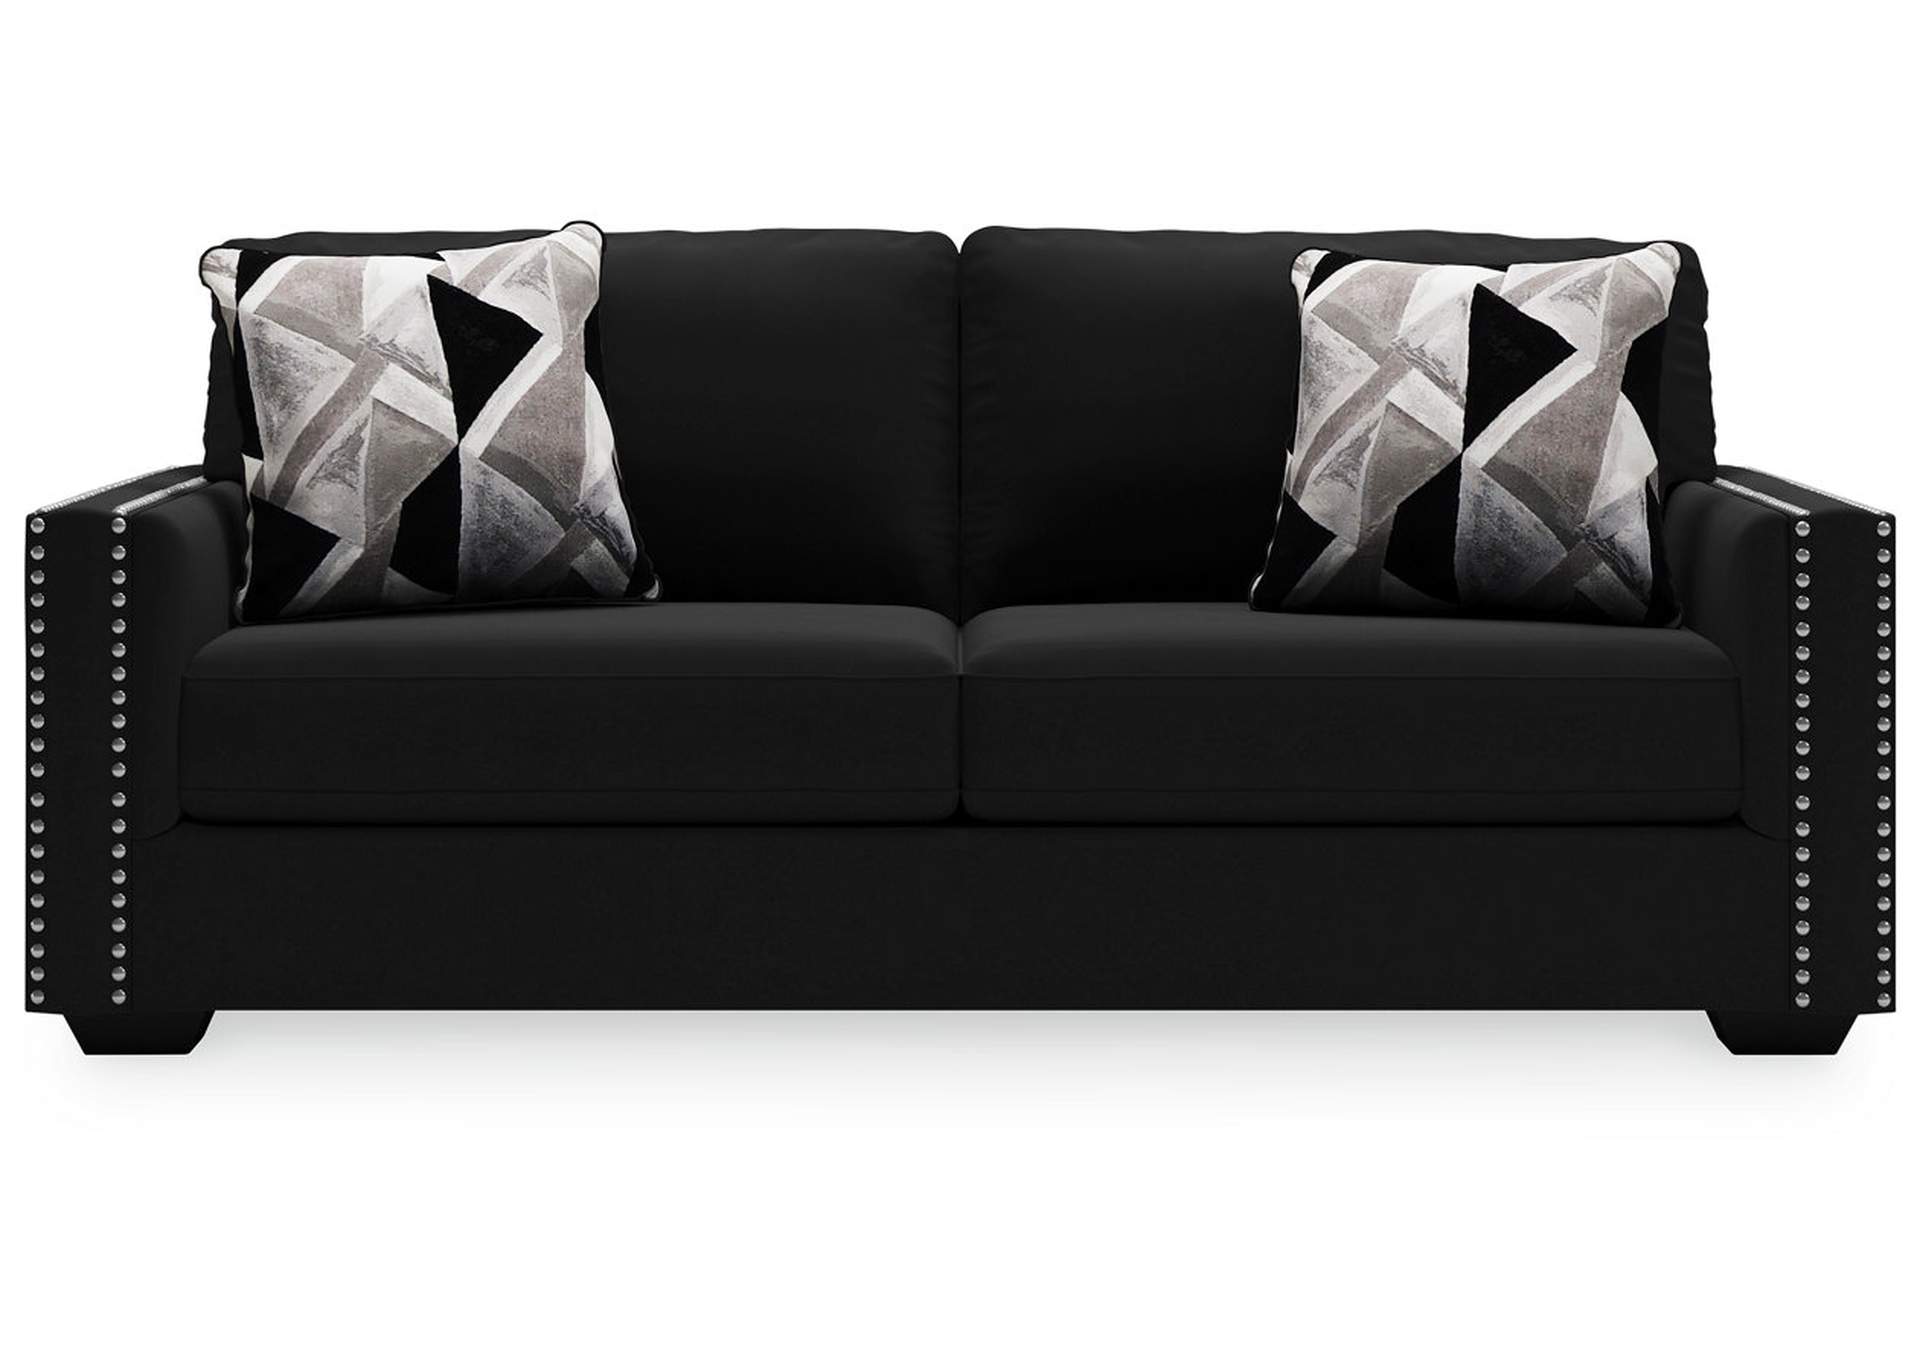 Gleston Sofa and Loveseat with Chair,Signature Design By Ashley